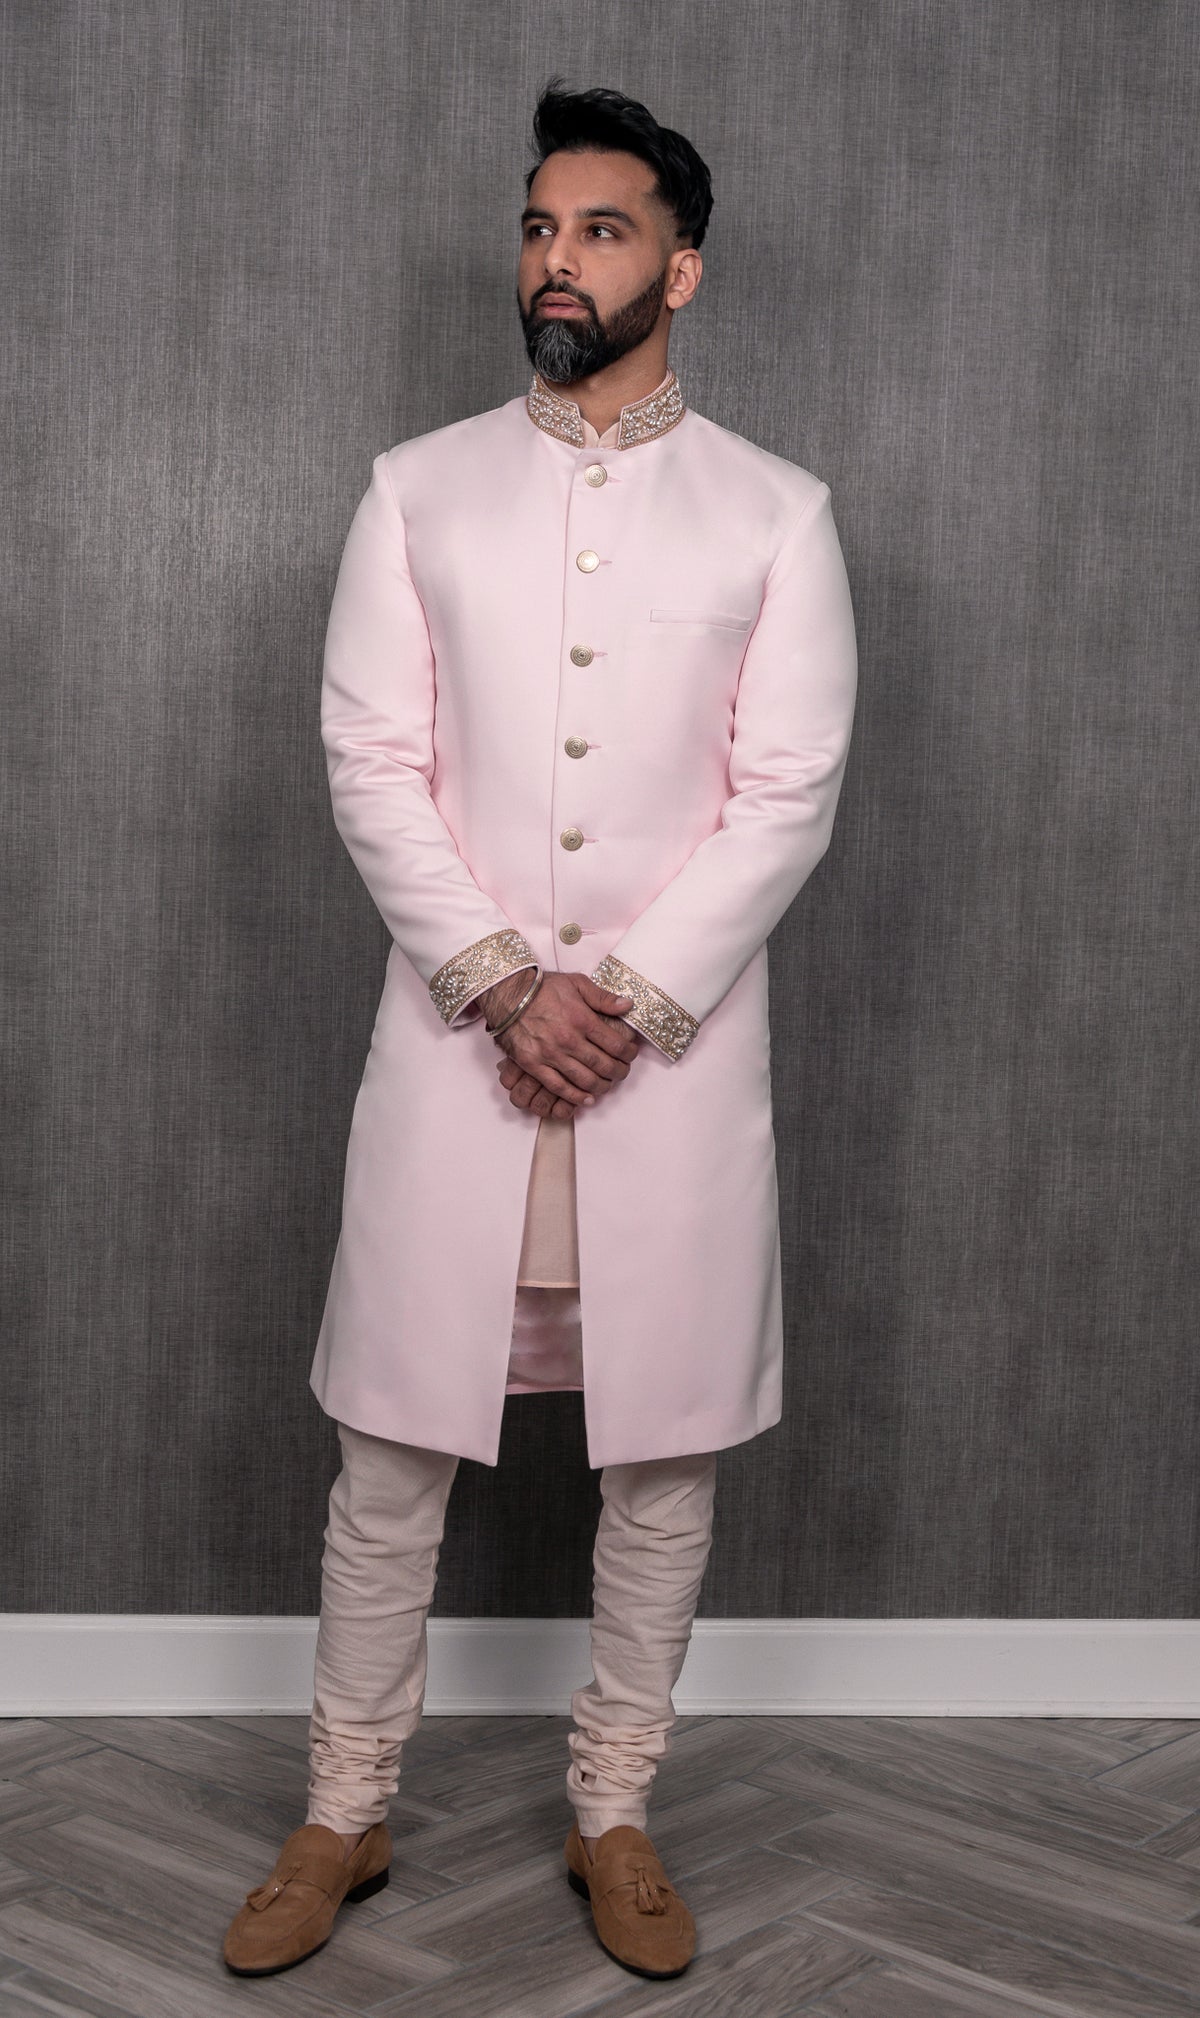 Front-facing view of PARAM light pink sherwani jacket with pearl cuffs and collar in front of simple gray background